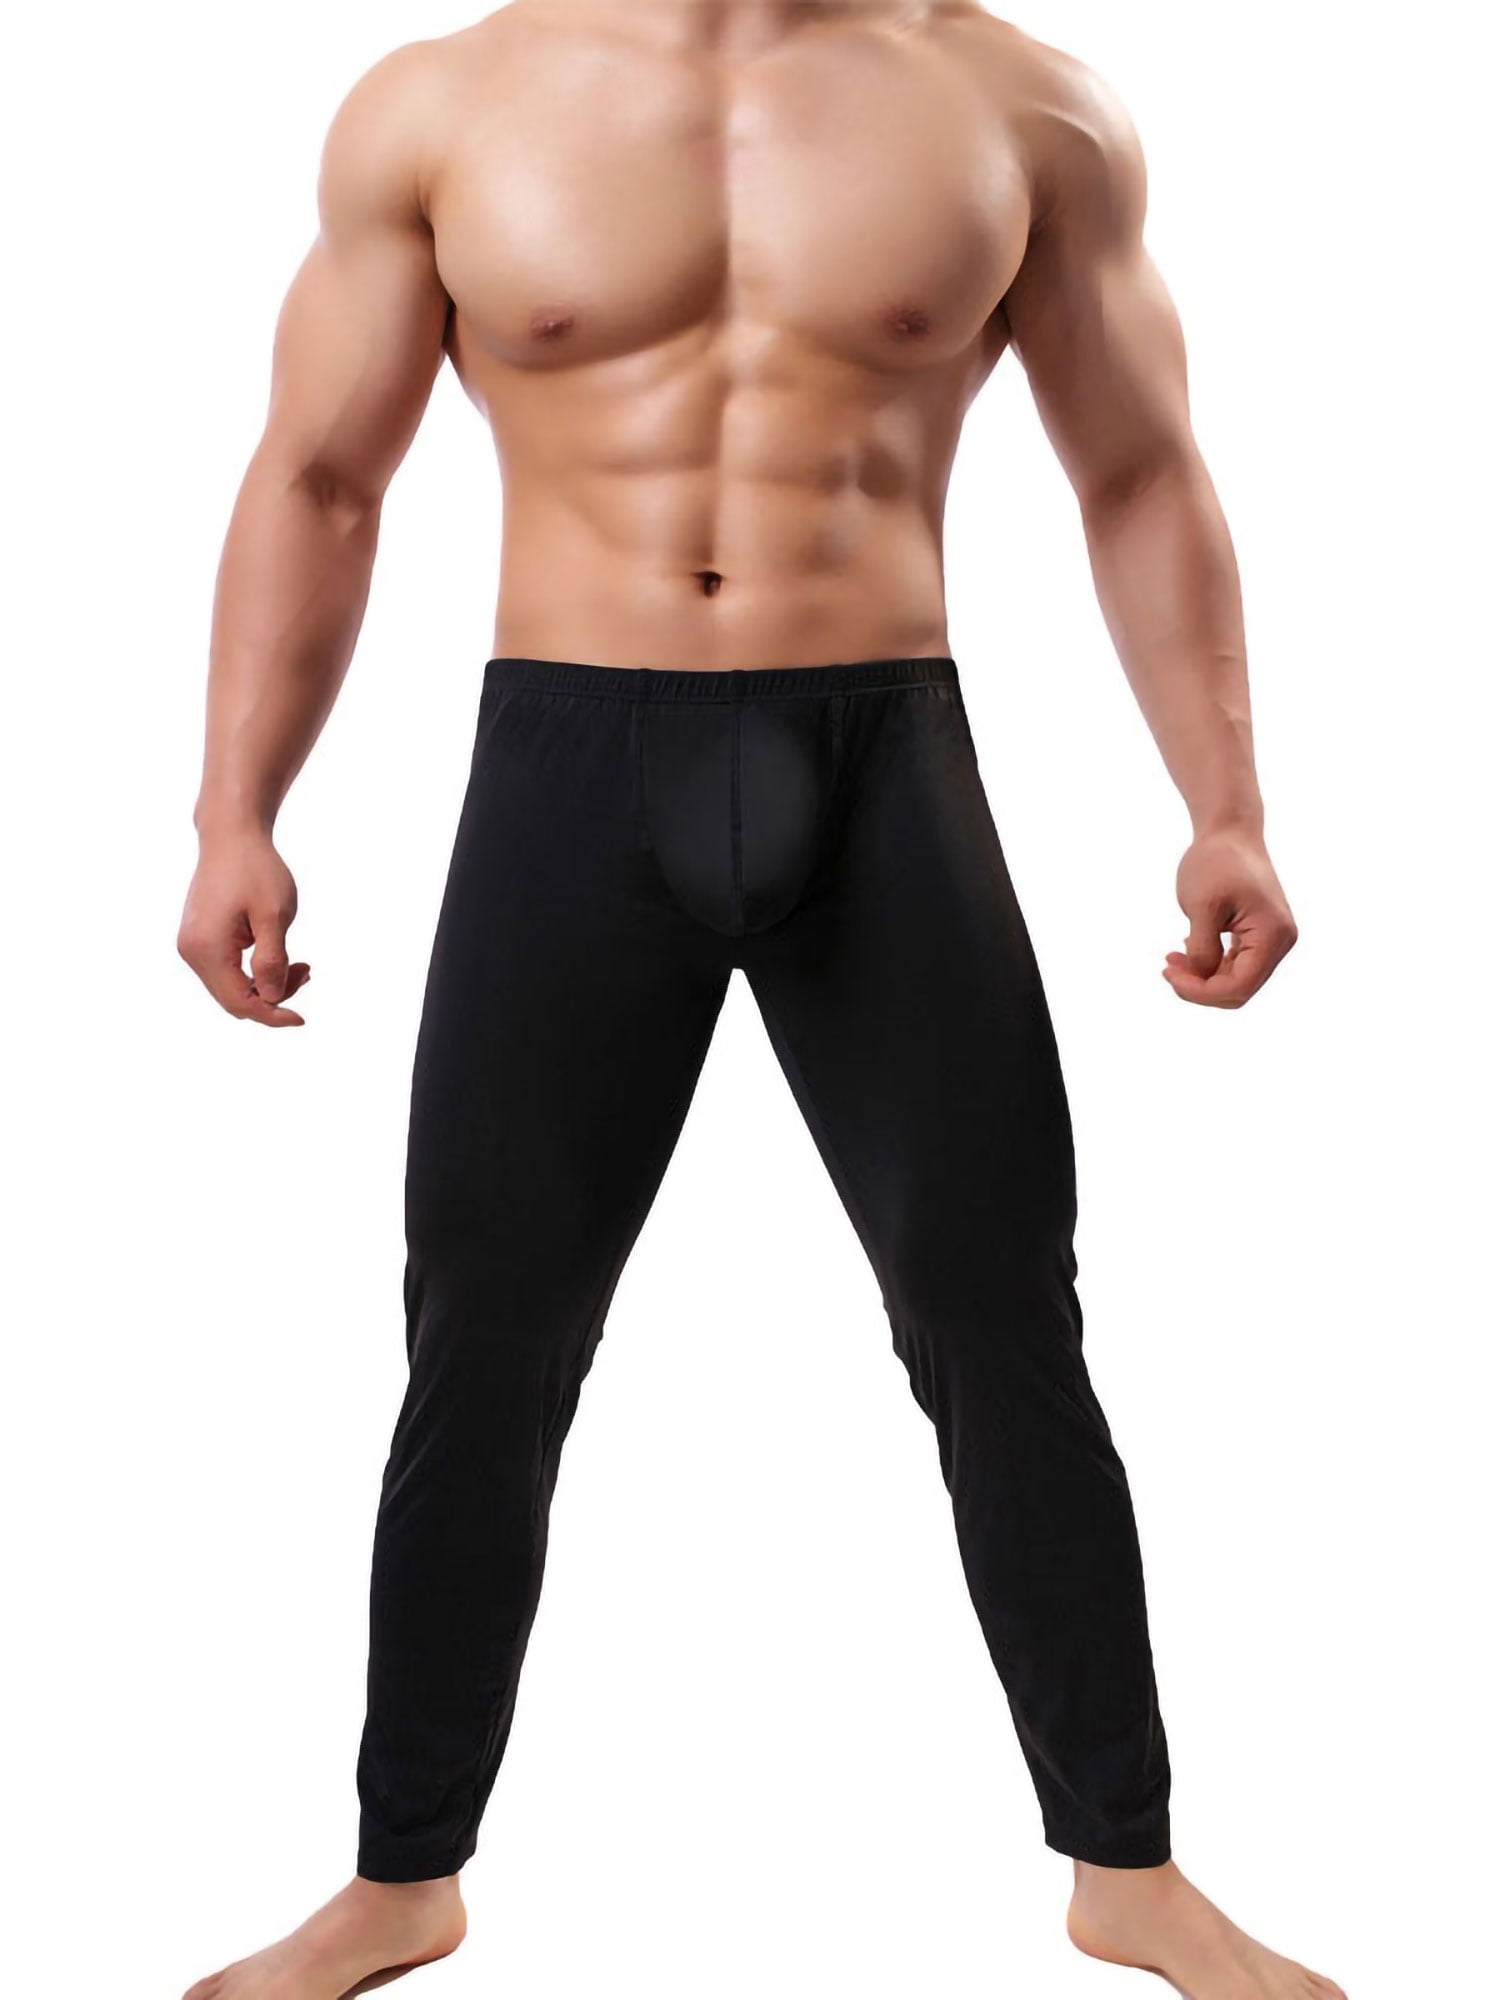 Men's Smooth Bodybuilding Gym T-shirt Basic Long Pants Boxers Shorts Briefs New